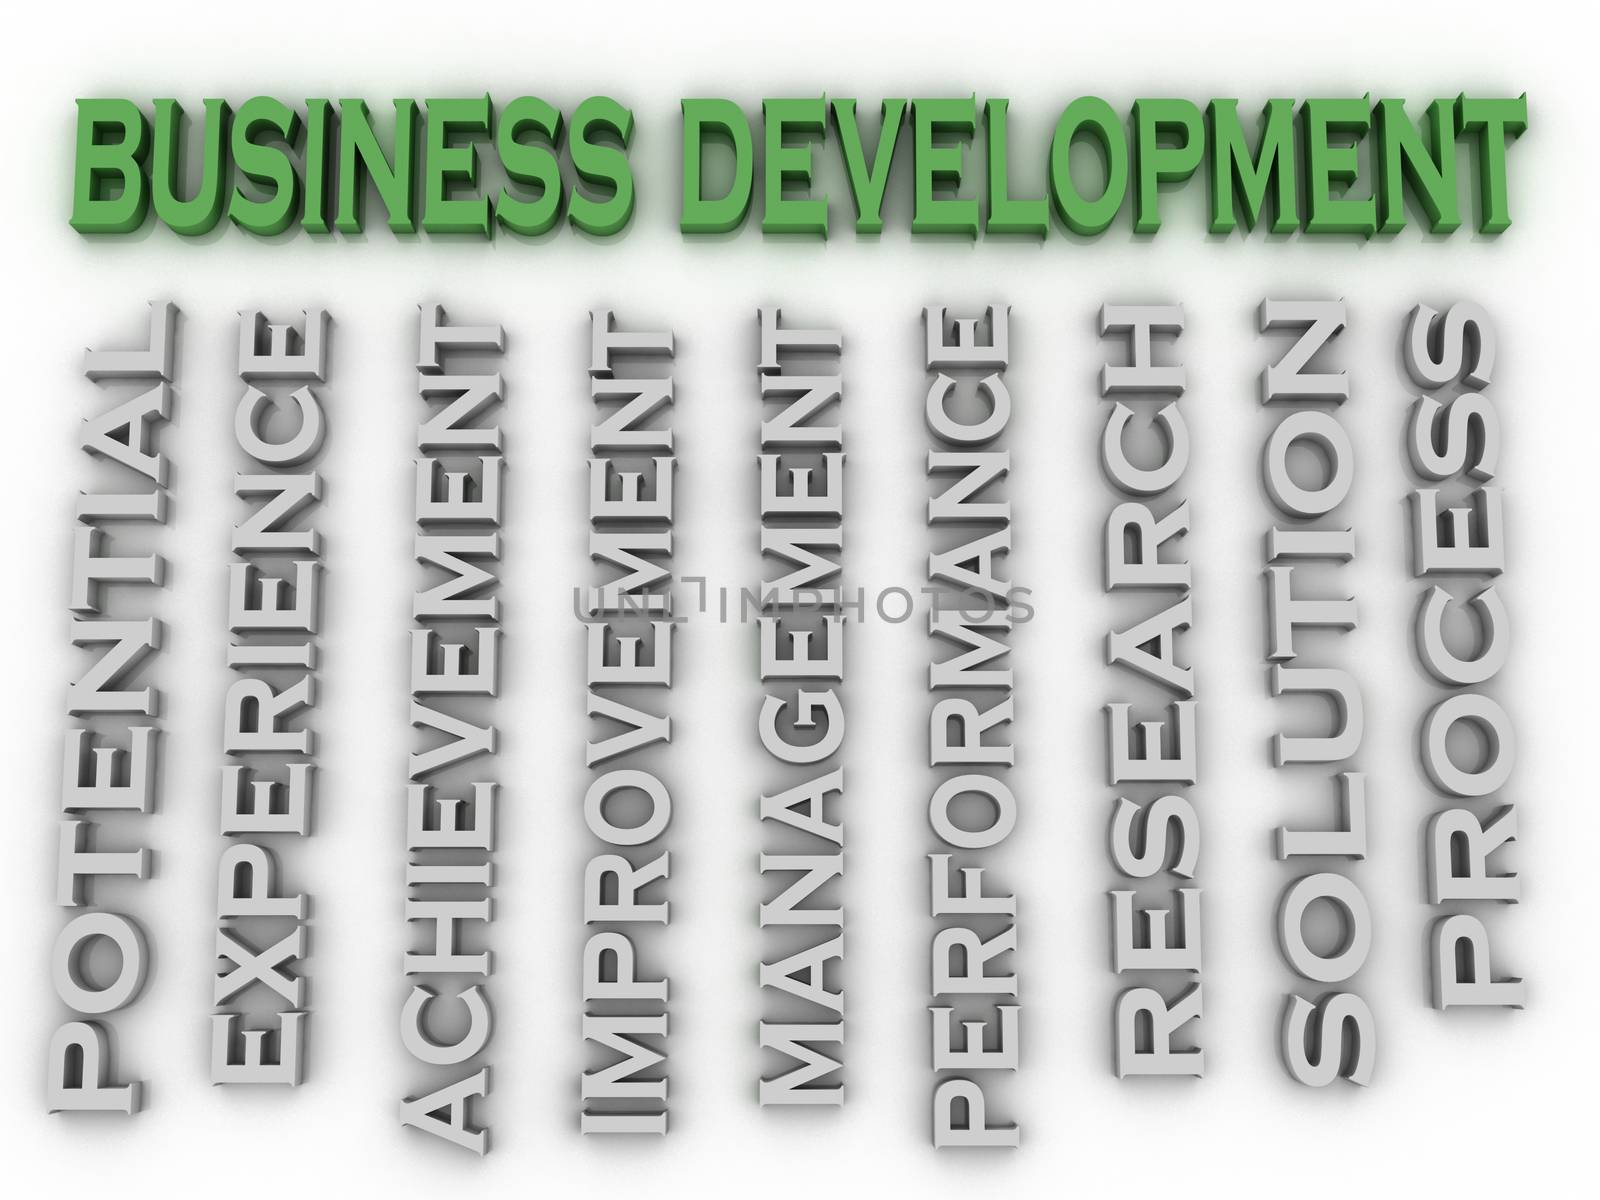 3d image Business development issues concept word cloud background